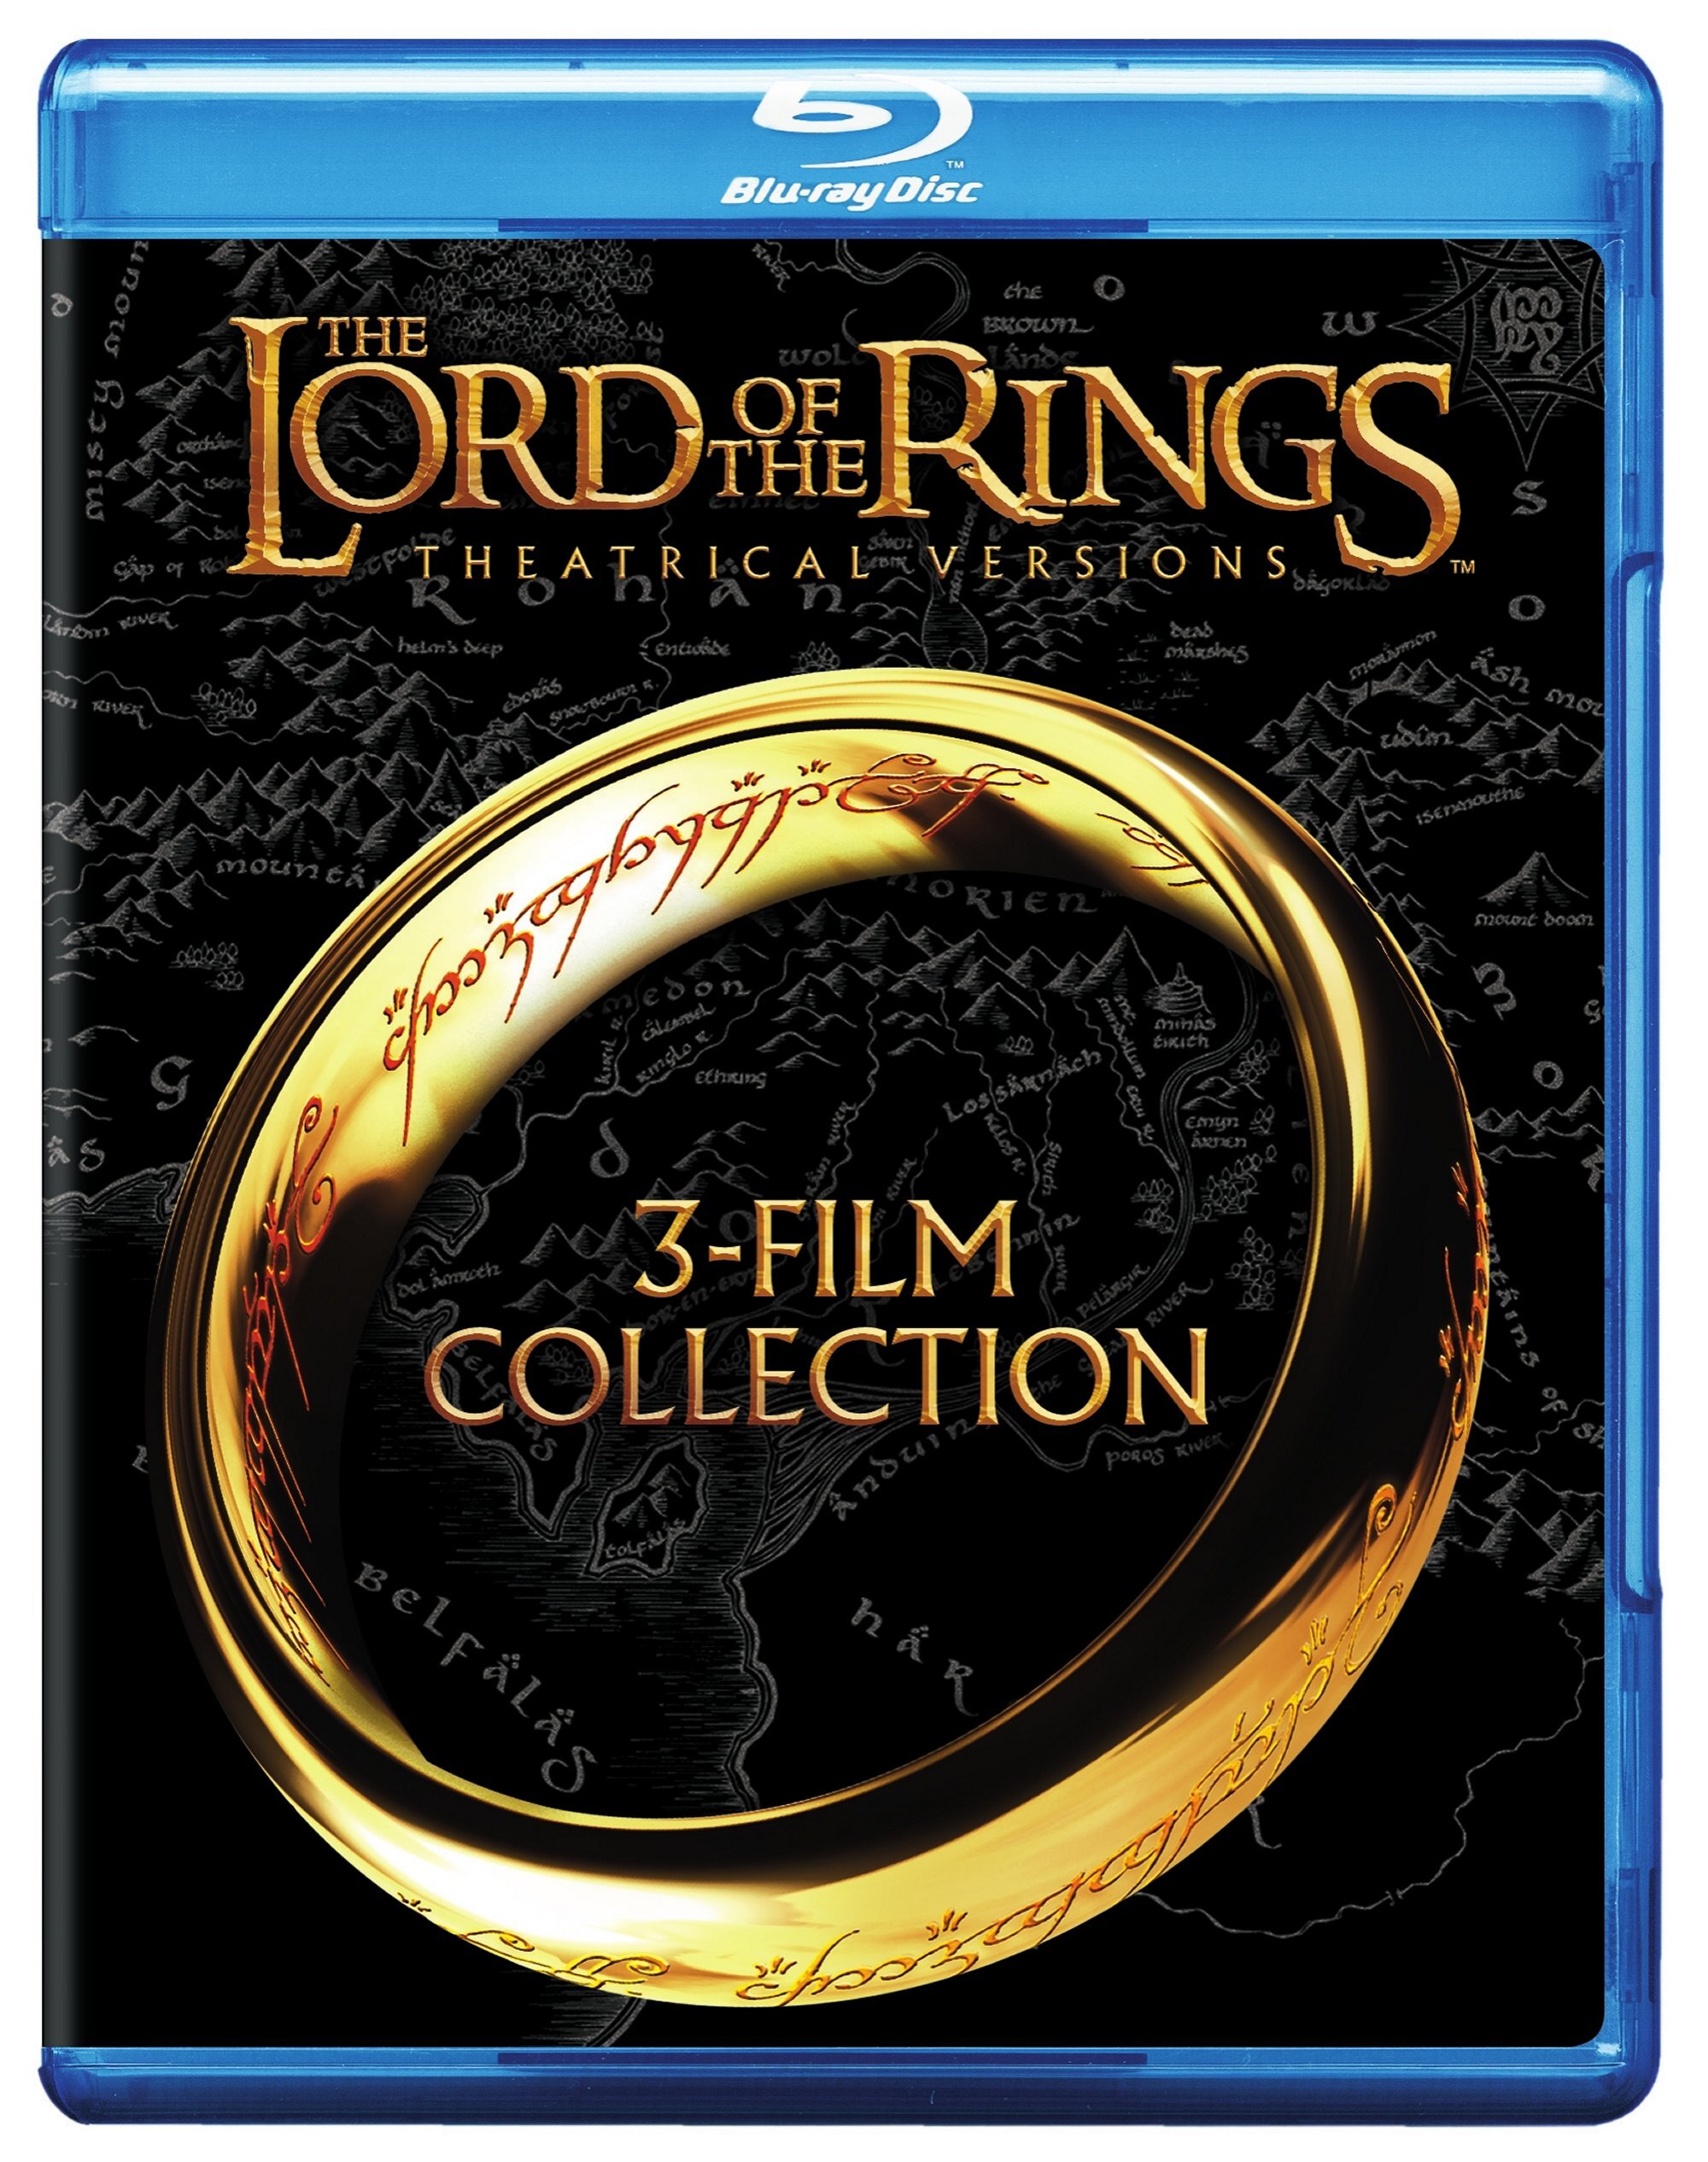 The Lord Of The Rings Trilogy (Box Set) - Blu-ray [ 2003 ]  - Adventure Movies On Blu-ray - Movies On GRUV